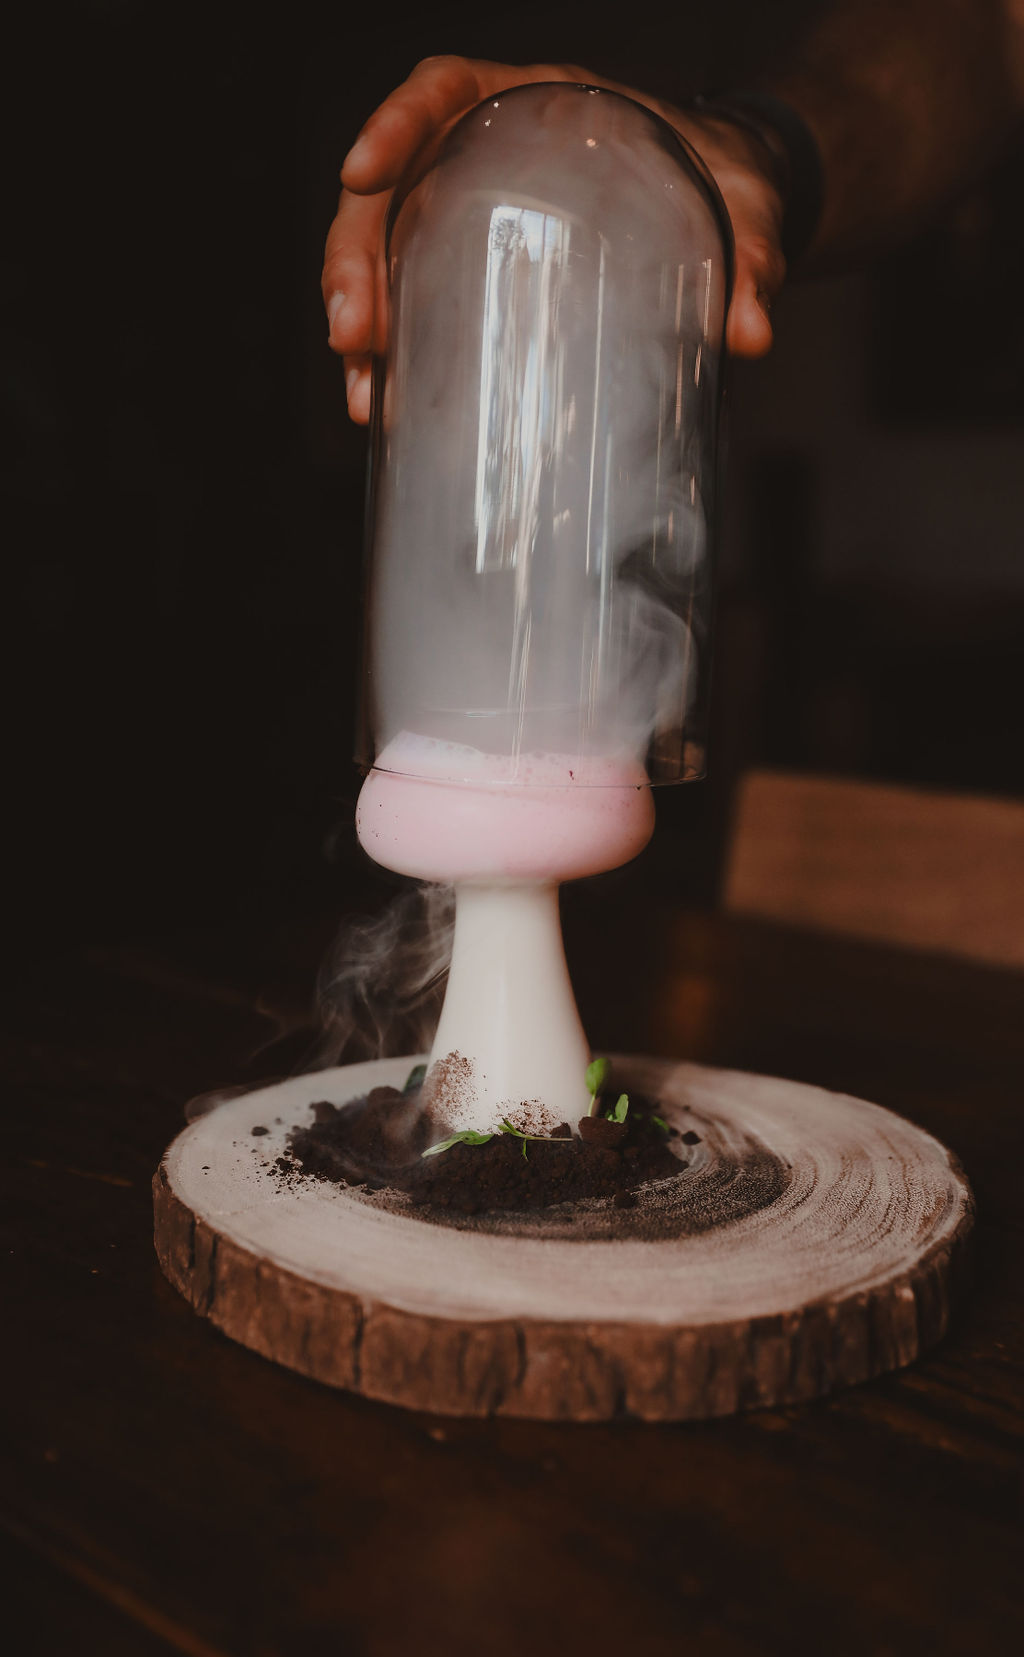 Dome glass being lifted from a mushroom glass on a wooden log